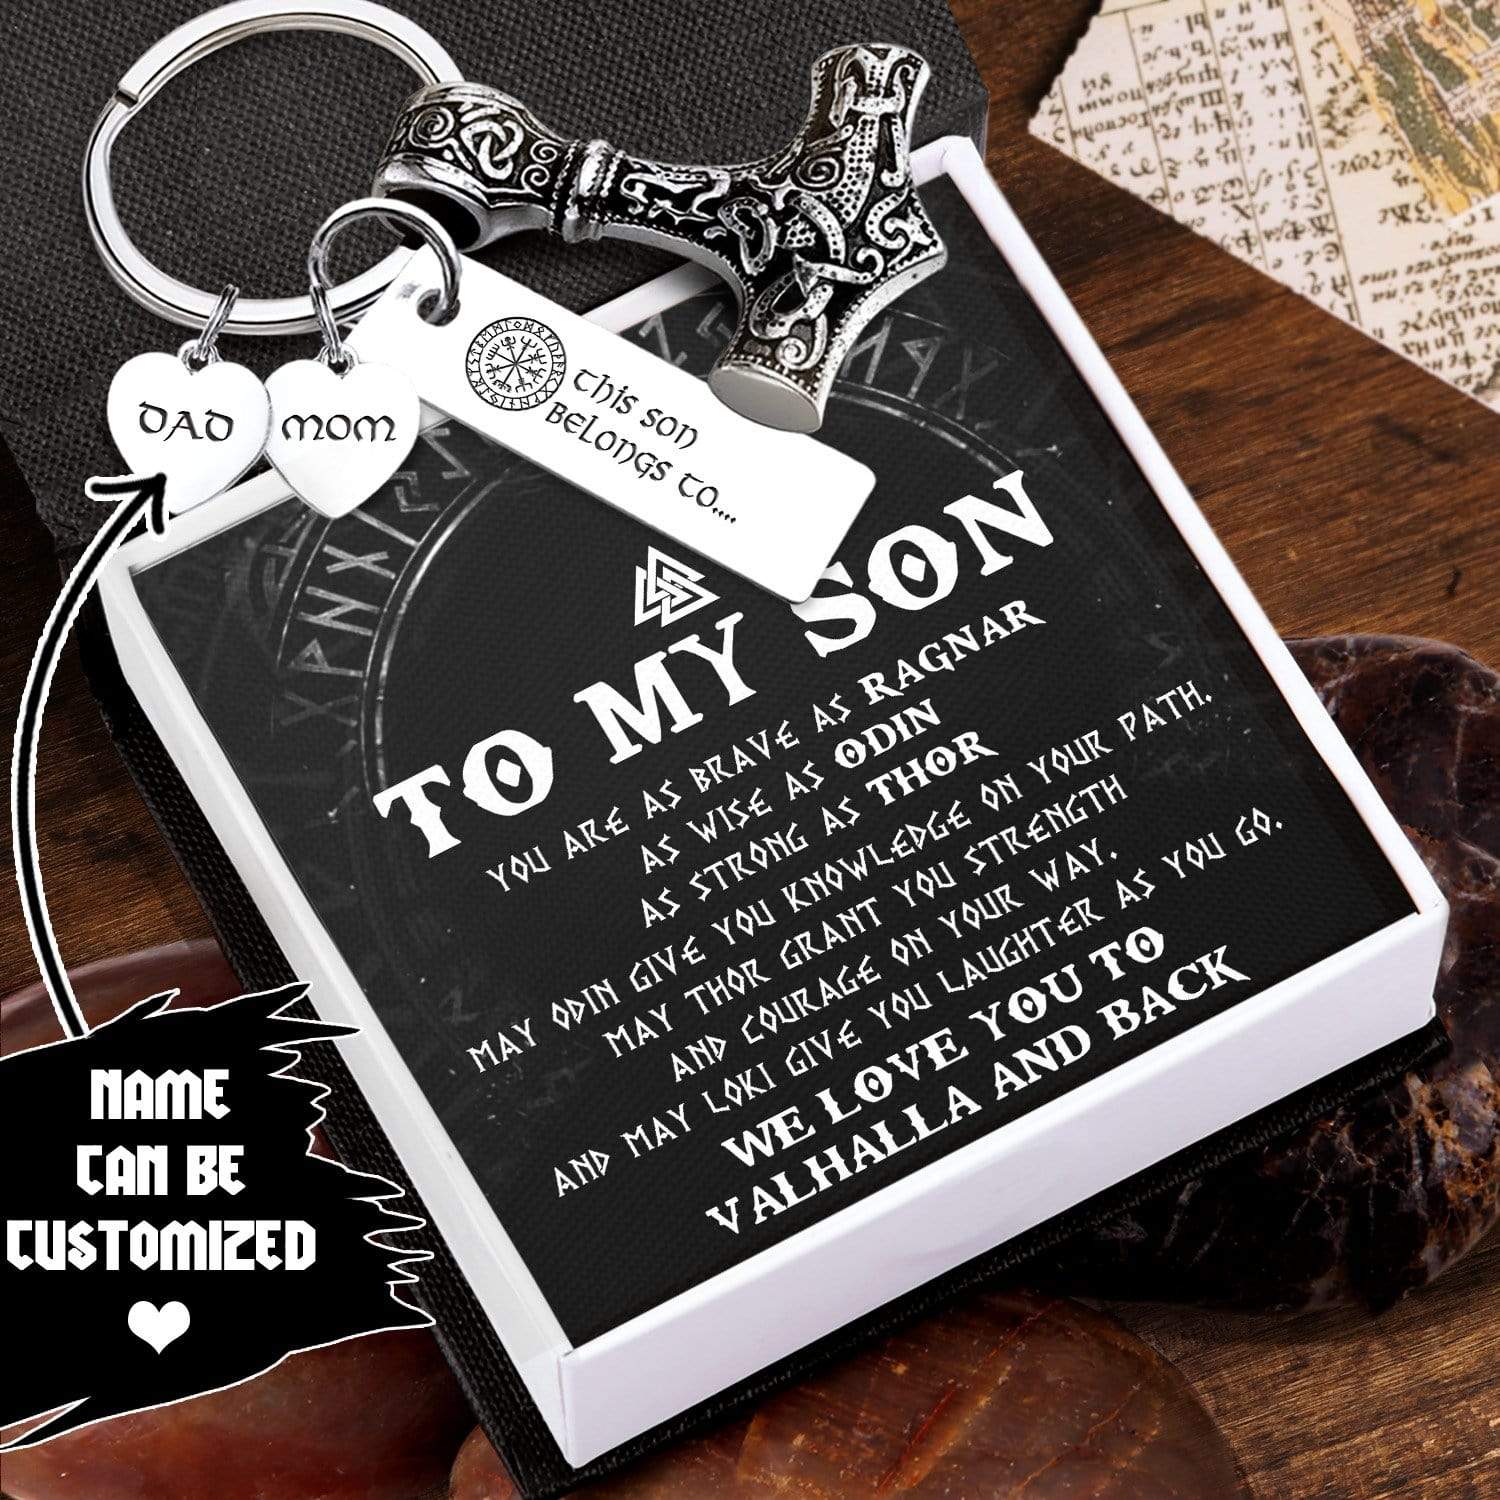 Personalized Viking Thor Keychain - Viking - To My Son - We Love You To Vahalla And Back - Gkbv16002